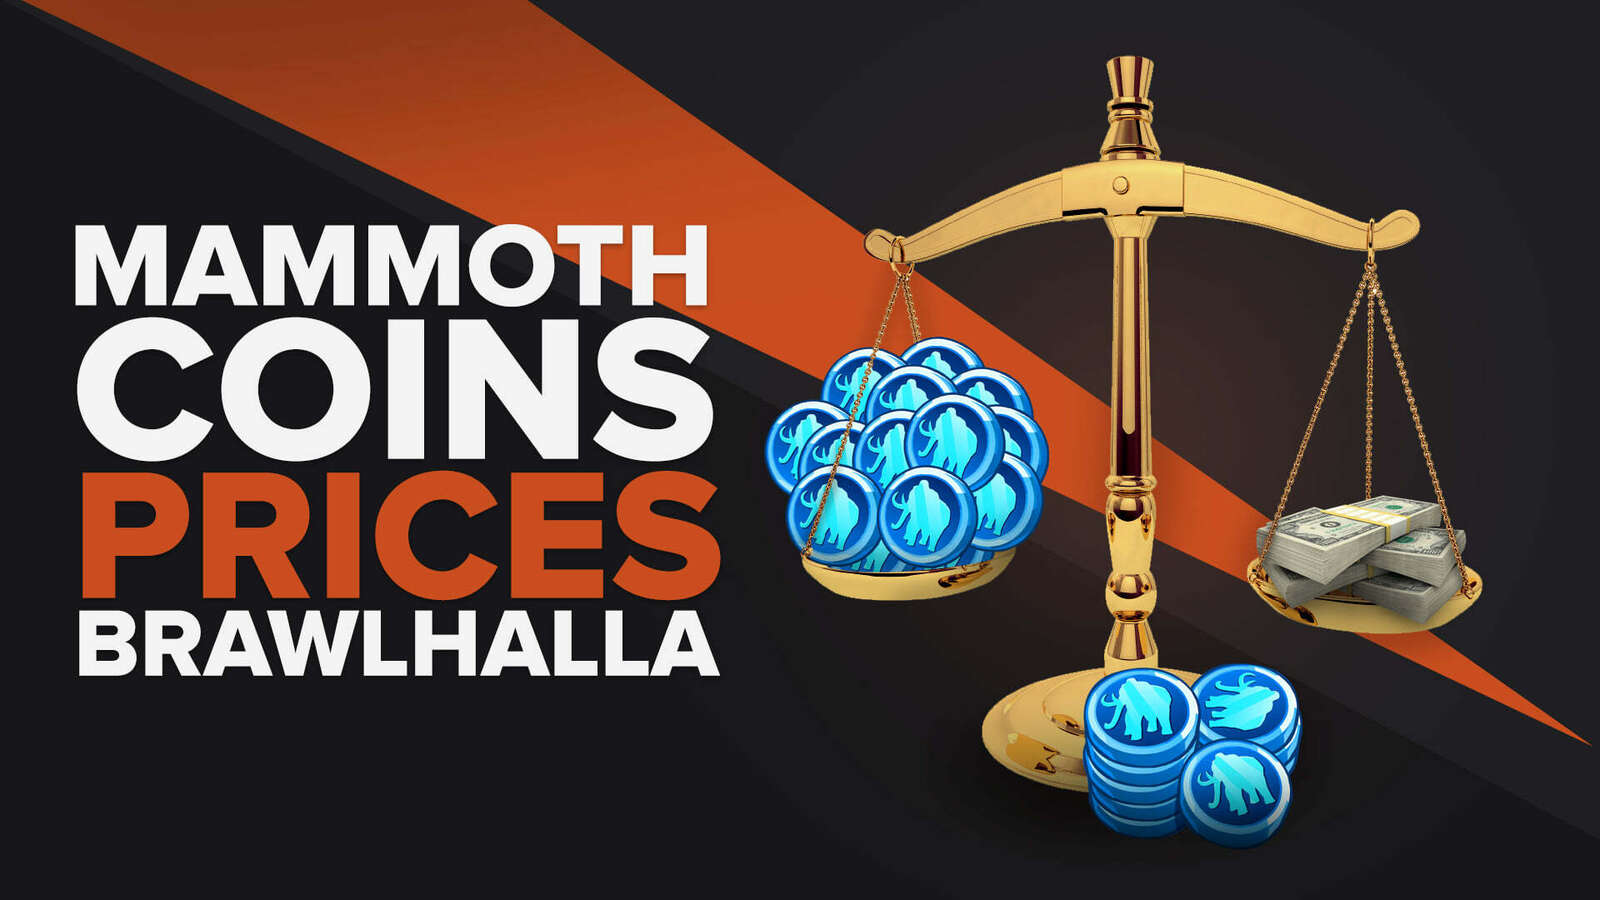 Brawlhalla: Mammoth Coins Prices & What Package Should You Get